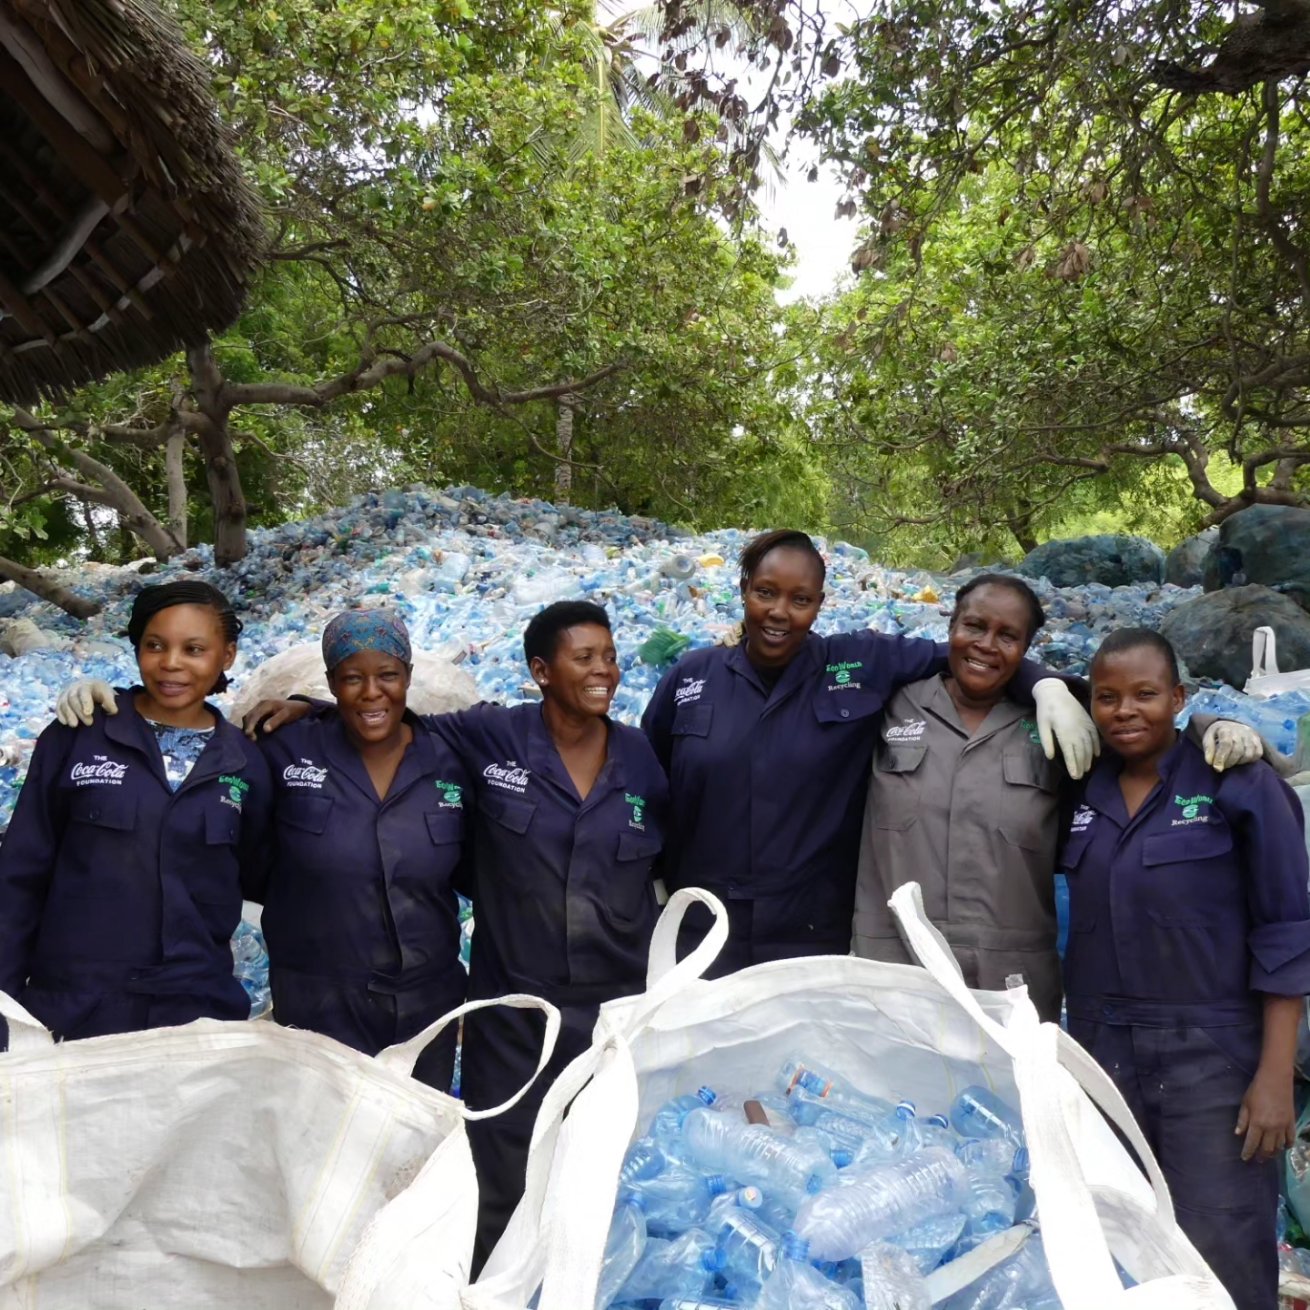 A group of five women in uniform stand smiling for the camera in front of a large pile of plastic bottles.